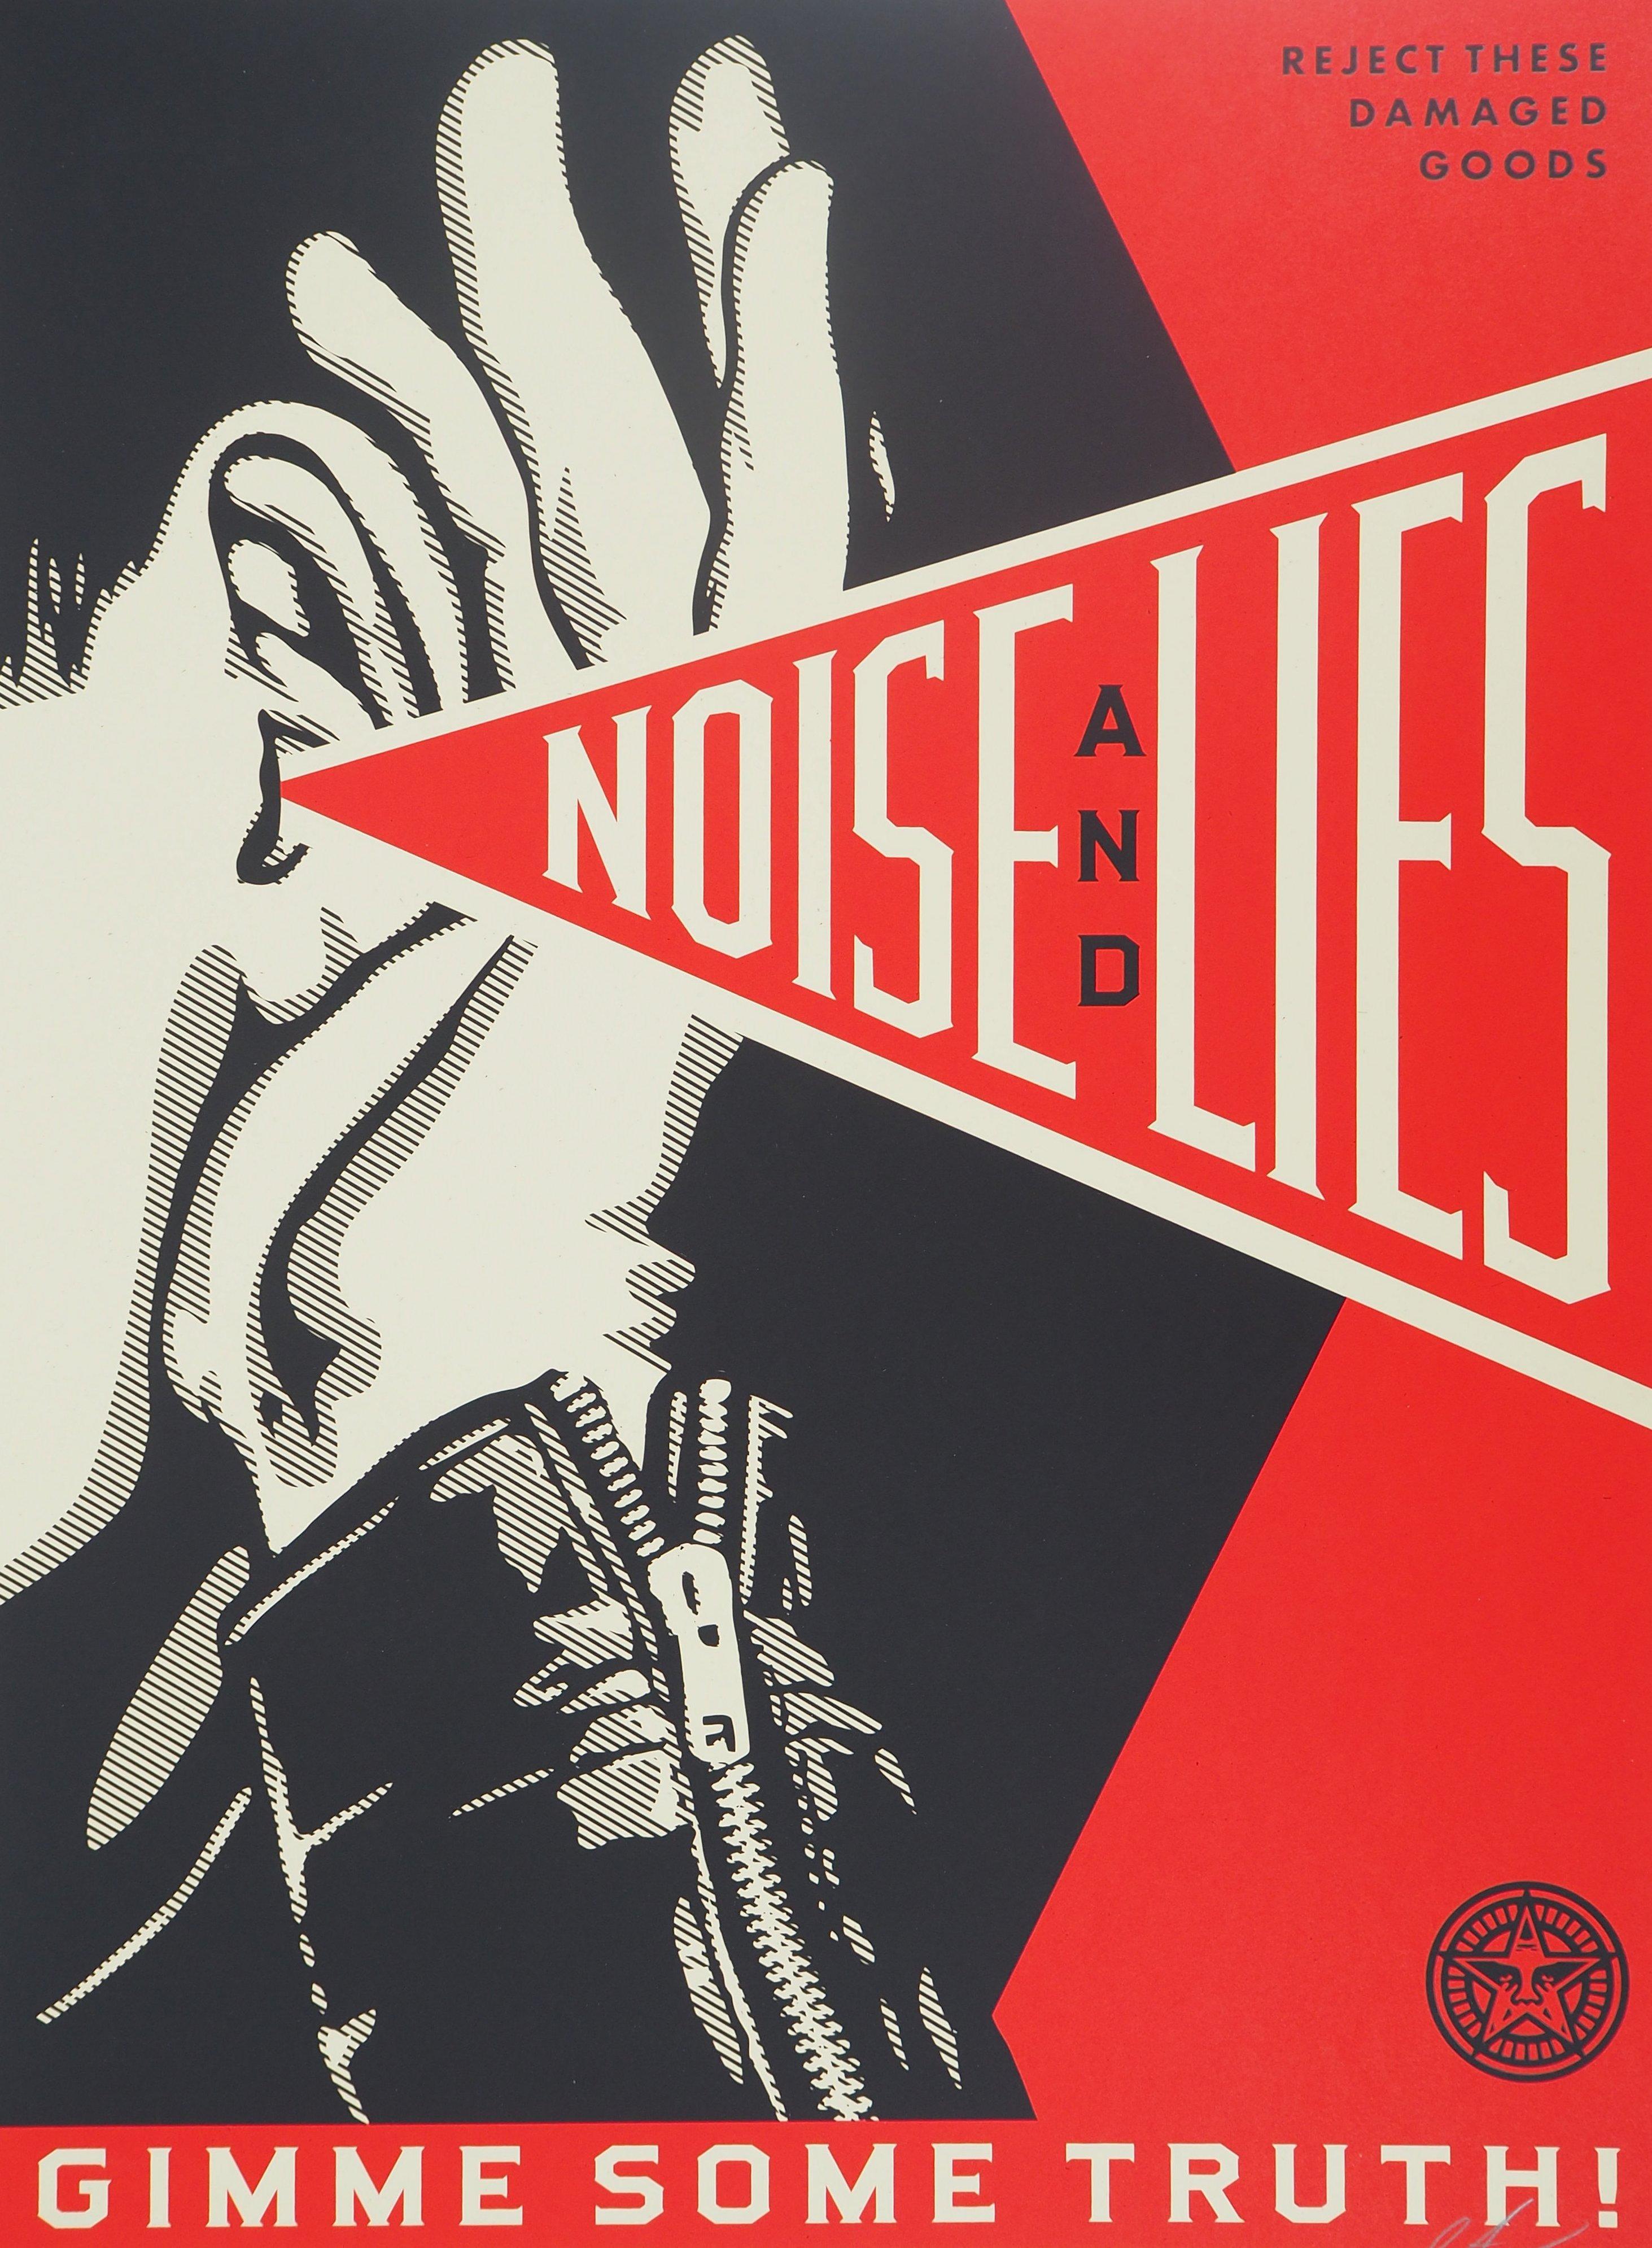 noise and lies